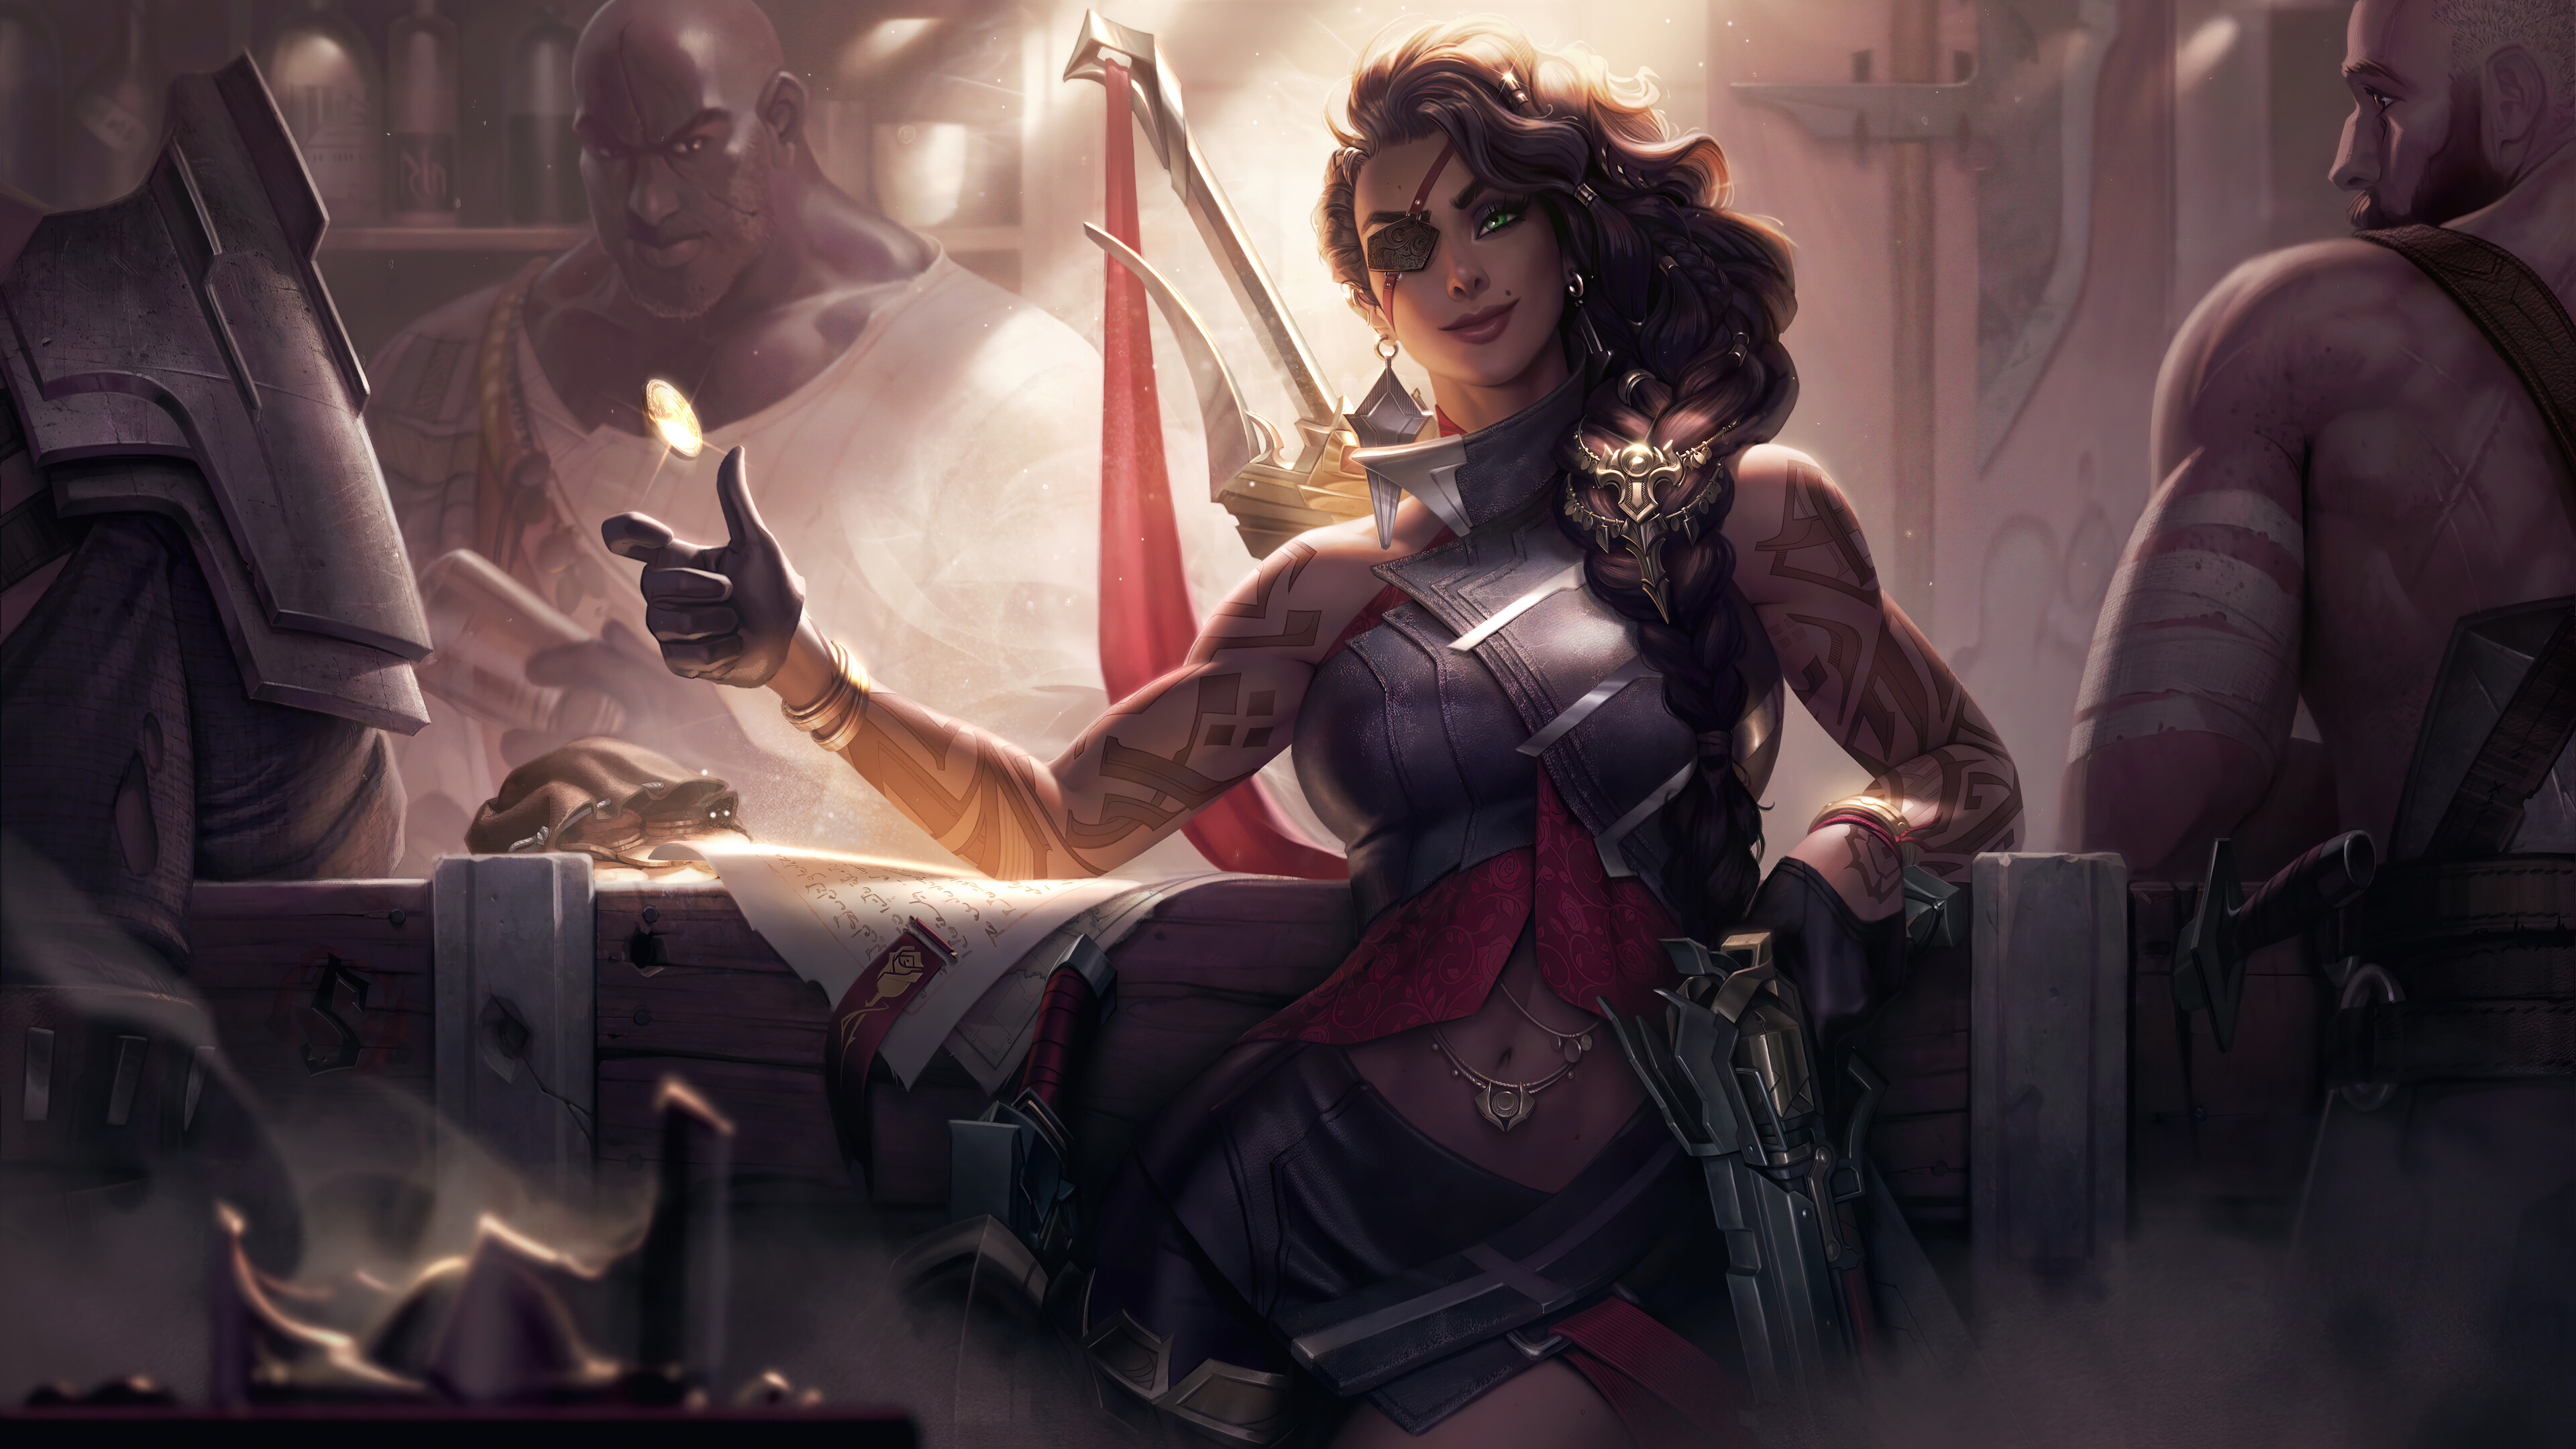 General 3840x2160 Samira (League of Legends) League of Legends Riot Games Adcarry ADC desert rose fantasy girl GZG digital art video games video game art smiling video game characters gun girls with guns coins gloves eyepatches tattoo